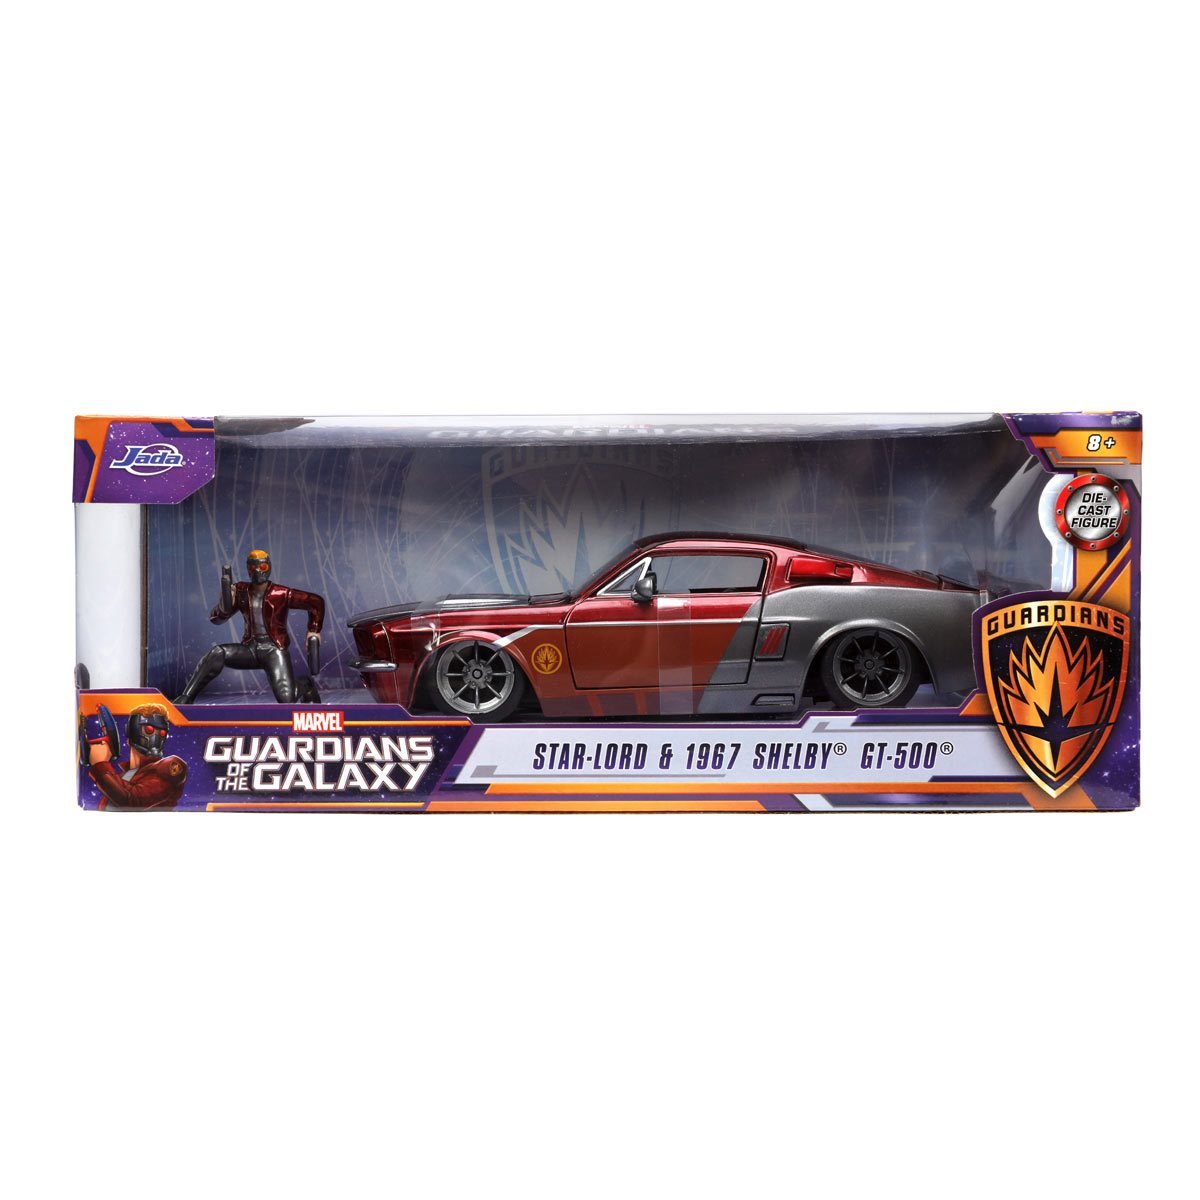 Guardians of the Galaxy - Star-Lord 1967 Mustang Shelby GT-500 1:24 Scale Die-Cast Metal Vehicle